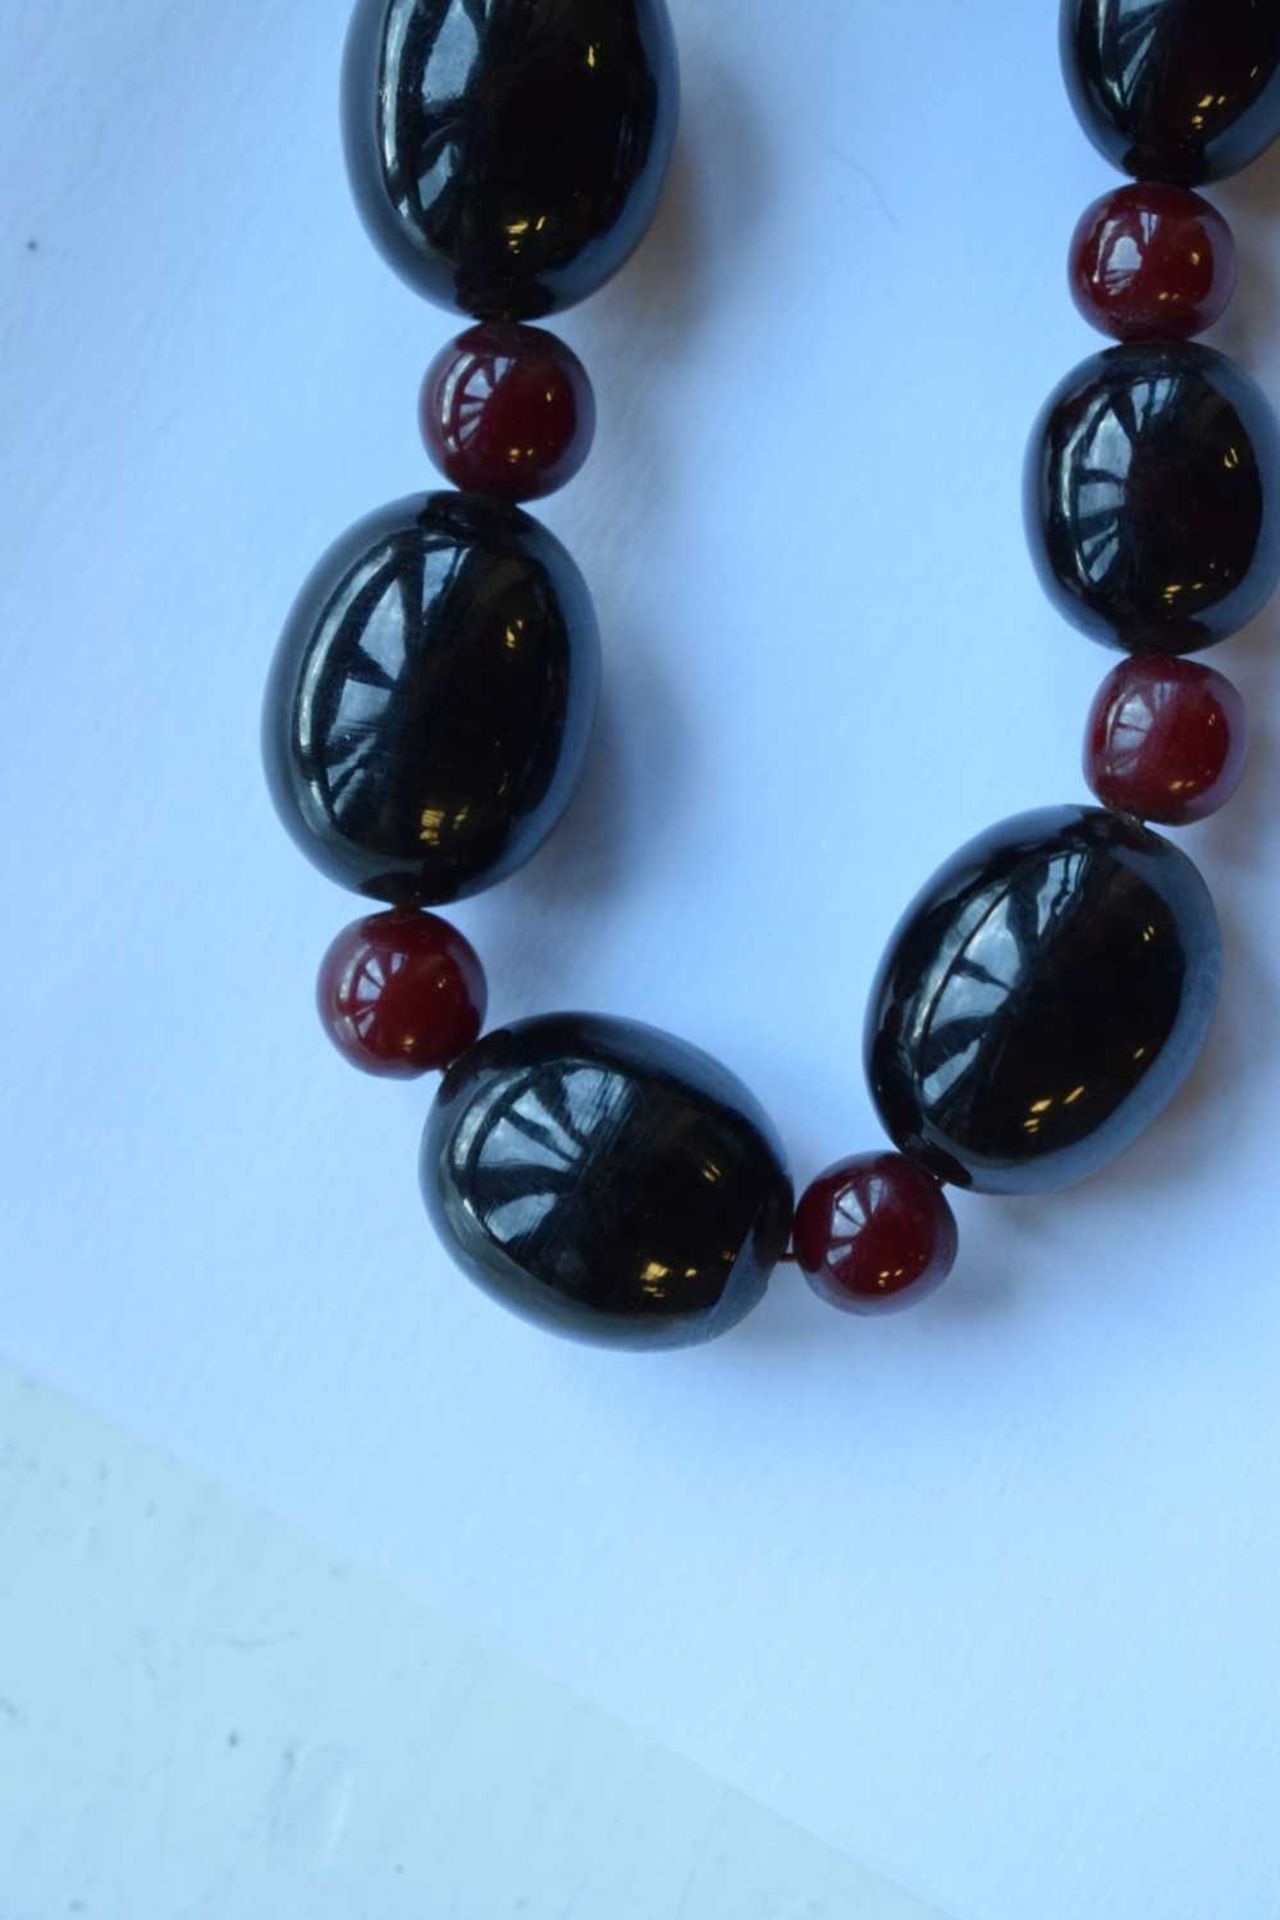 'Cherry amber' coloured bead necklace - Image 8 of 14